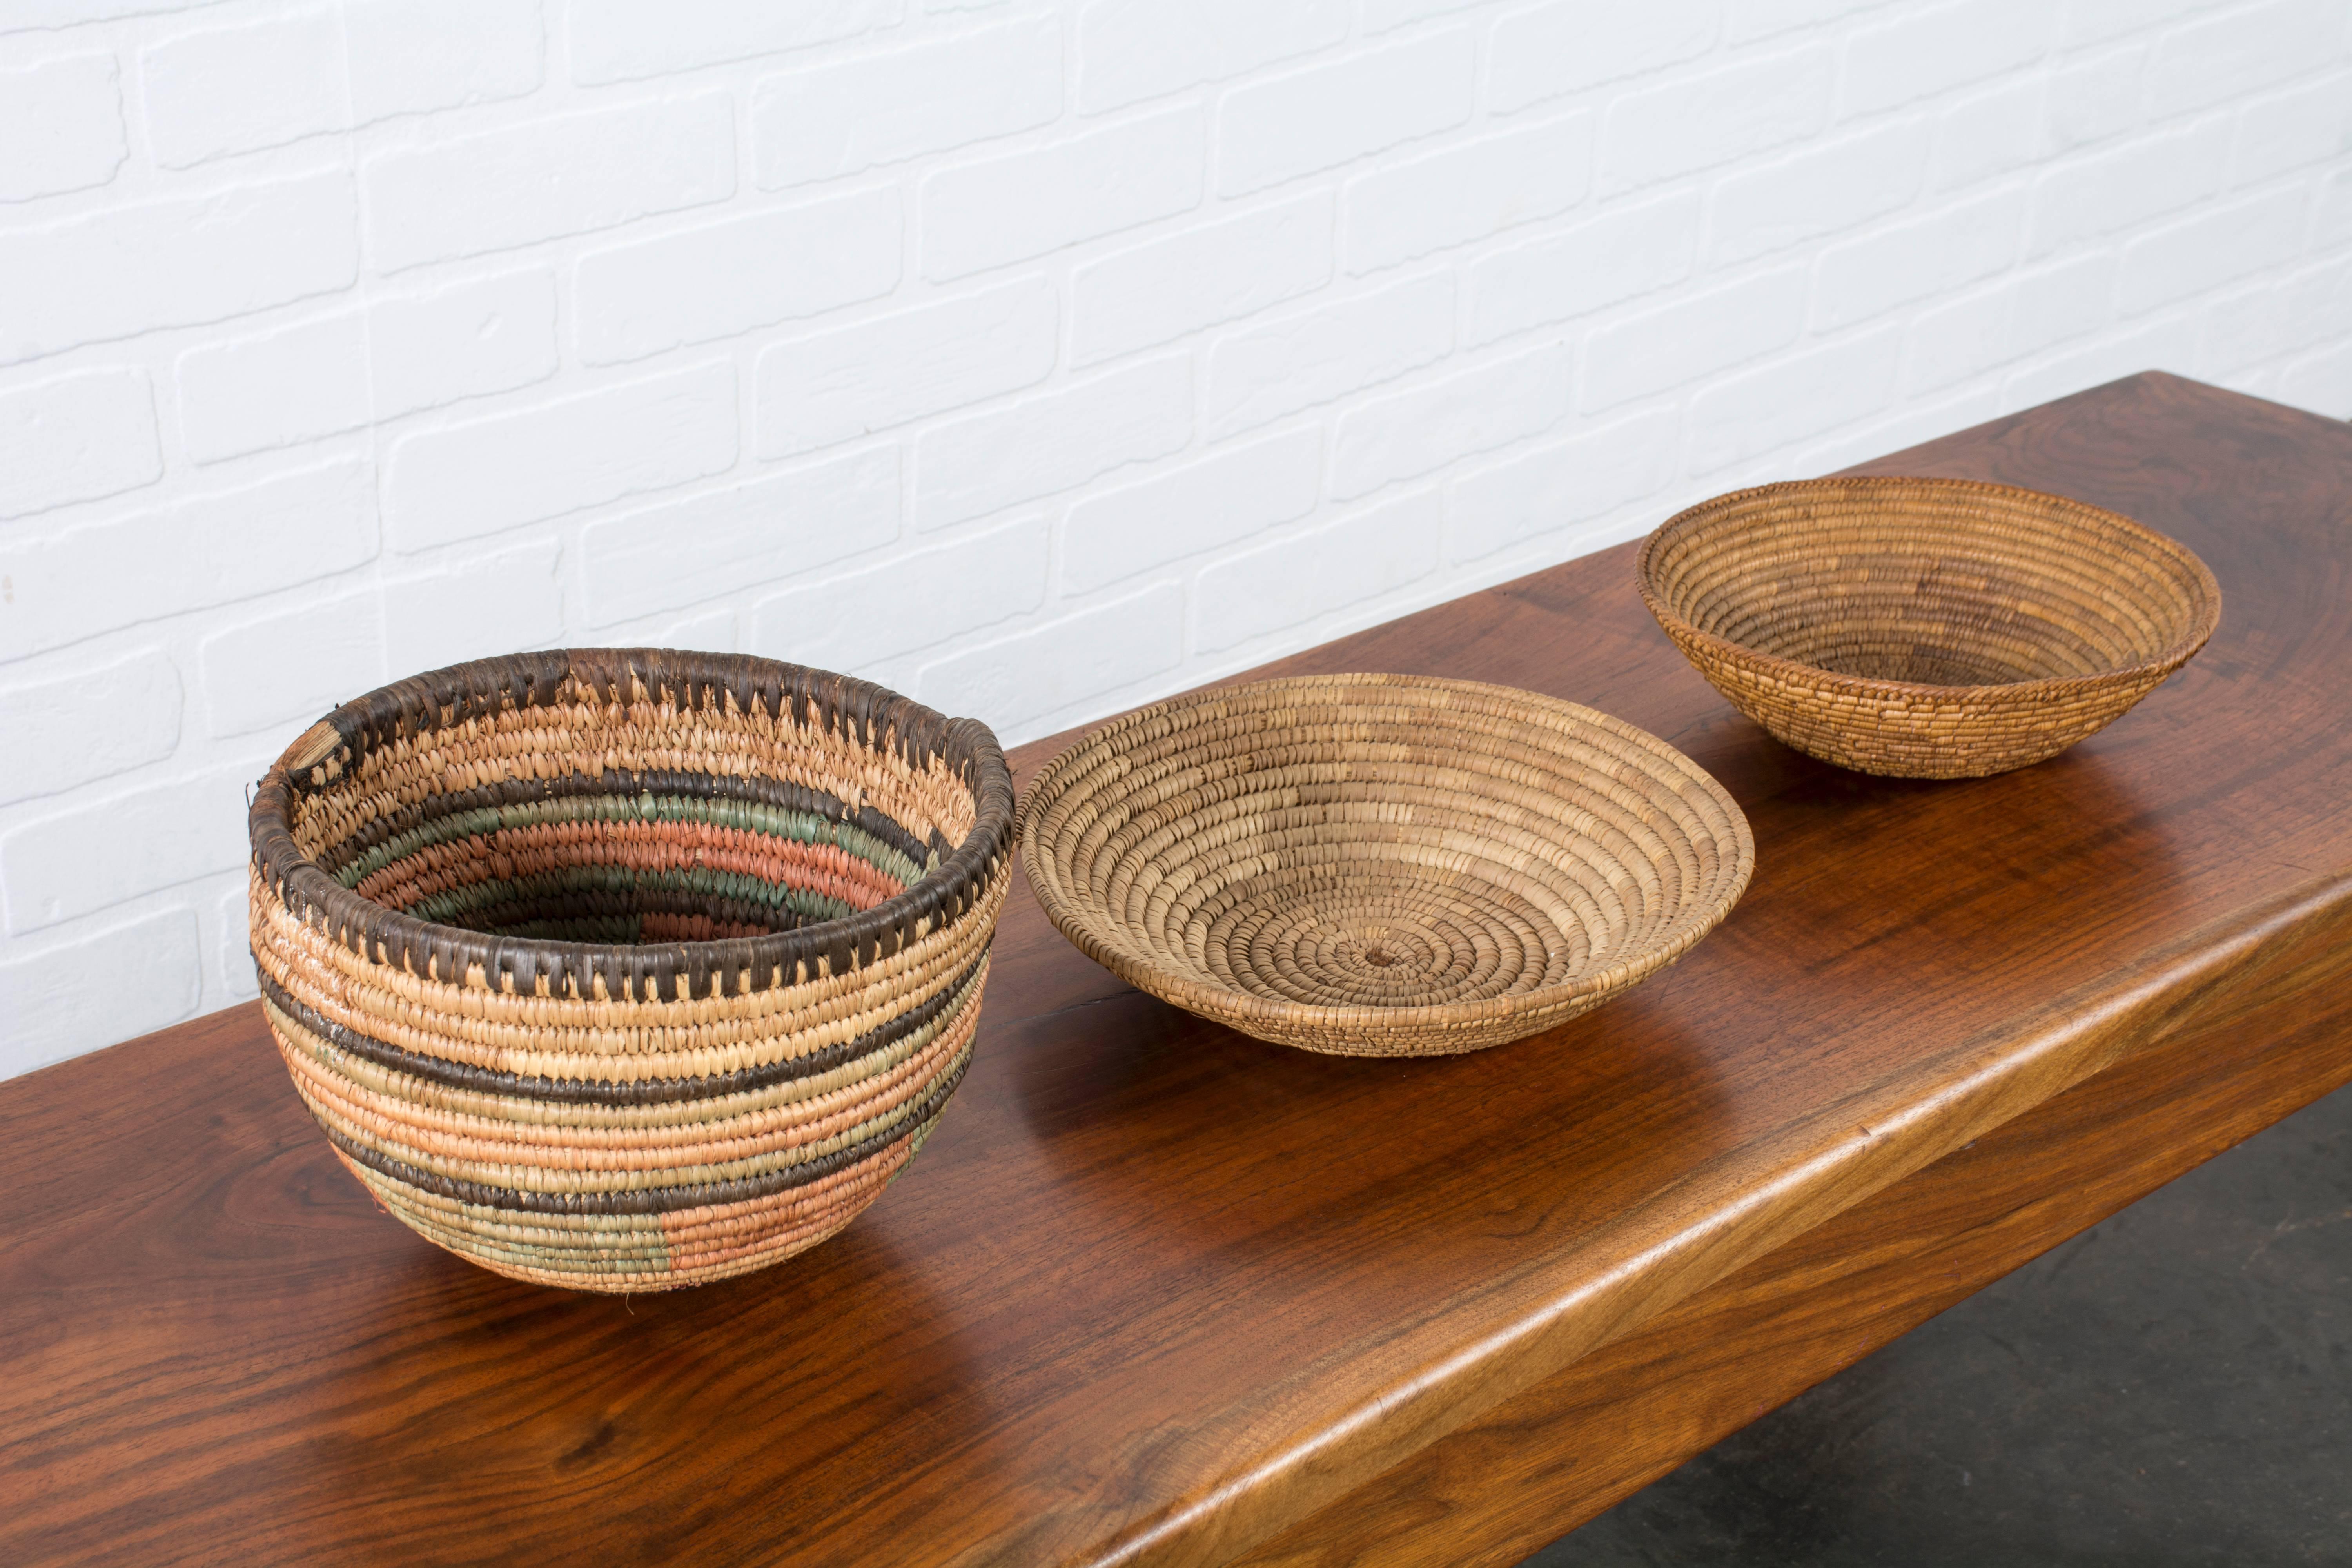 This is a set of three Native American baskets. Measurements: Left: 9"diameter, middle: 10.13"diameter, right: 8.63"diameter.